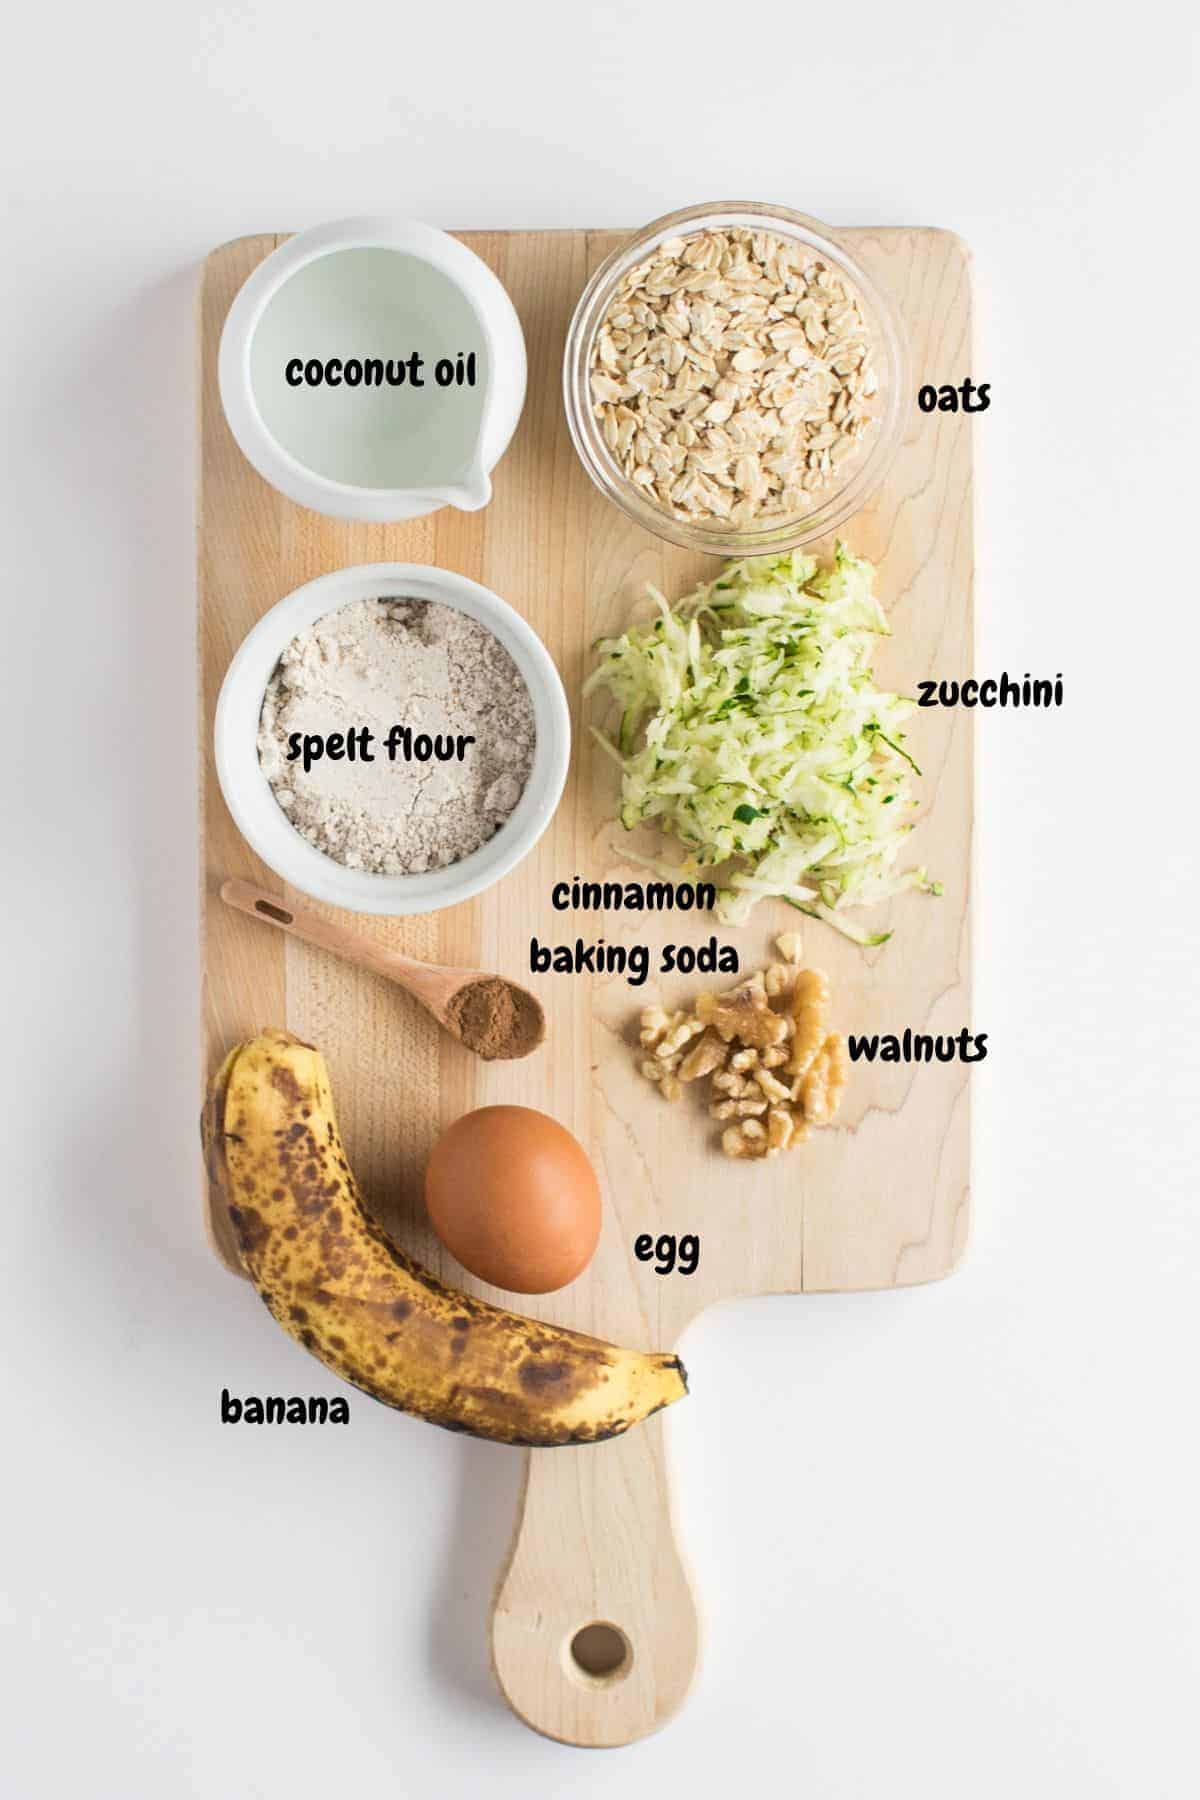 all the ingredients placed on a wooden board